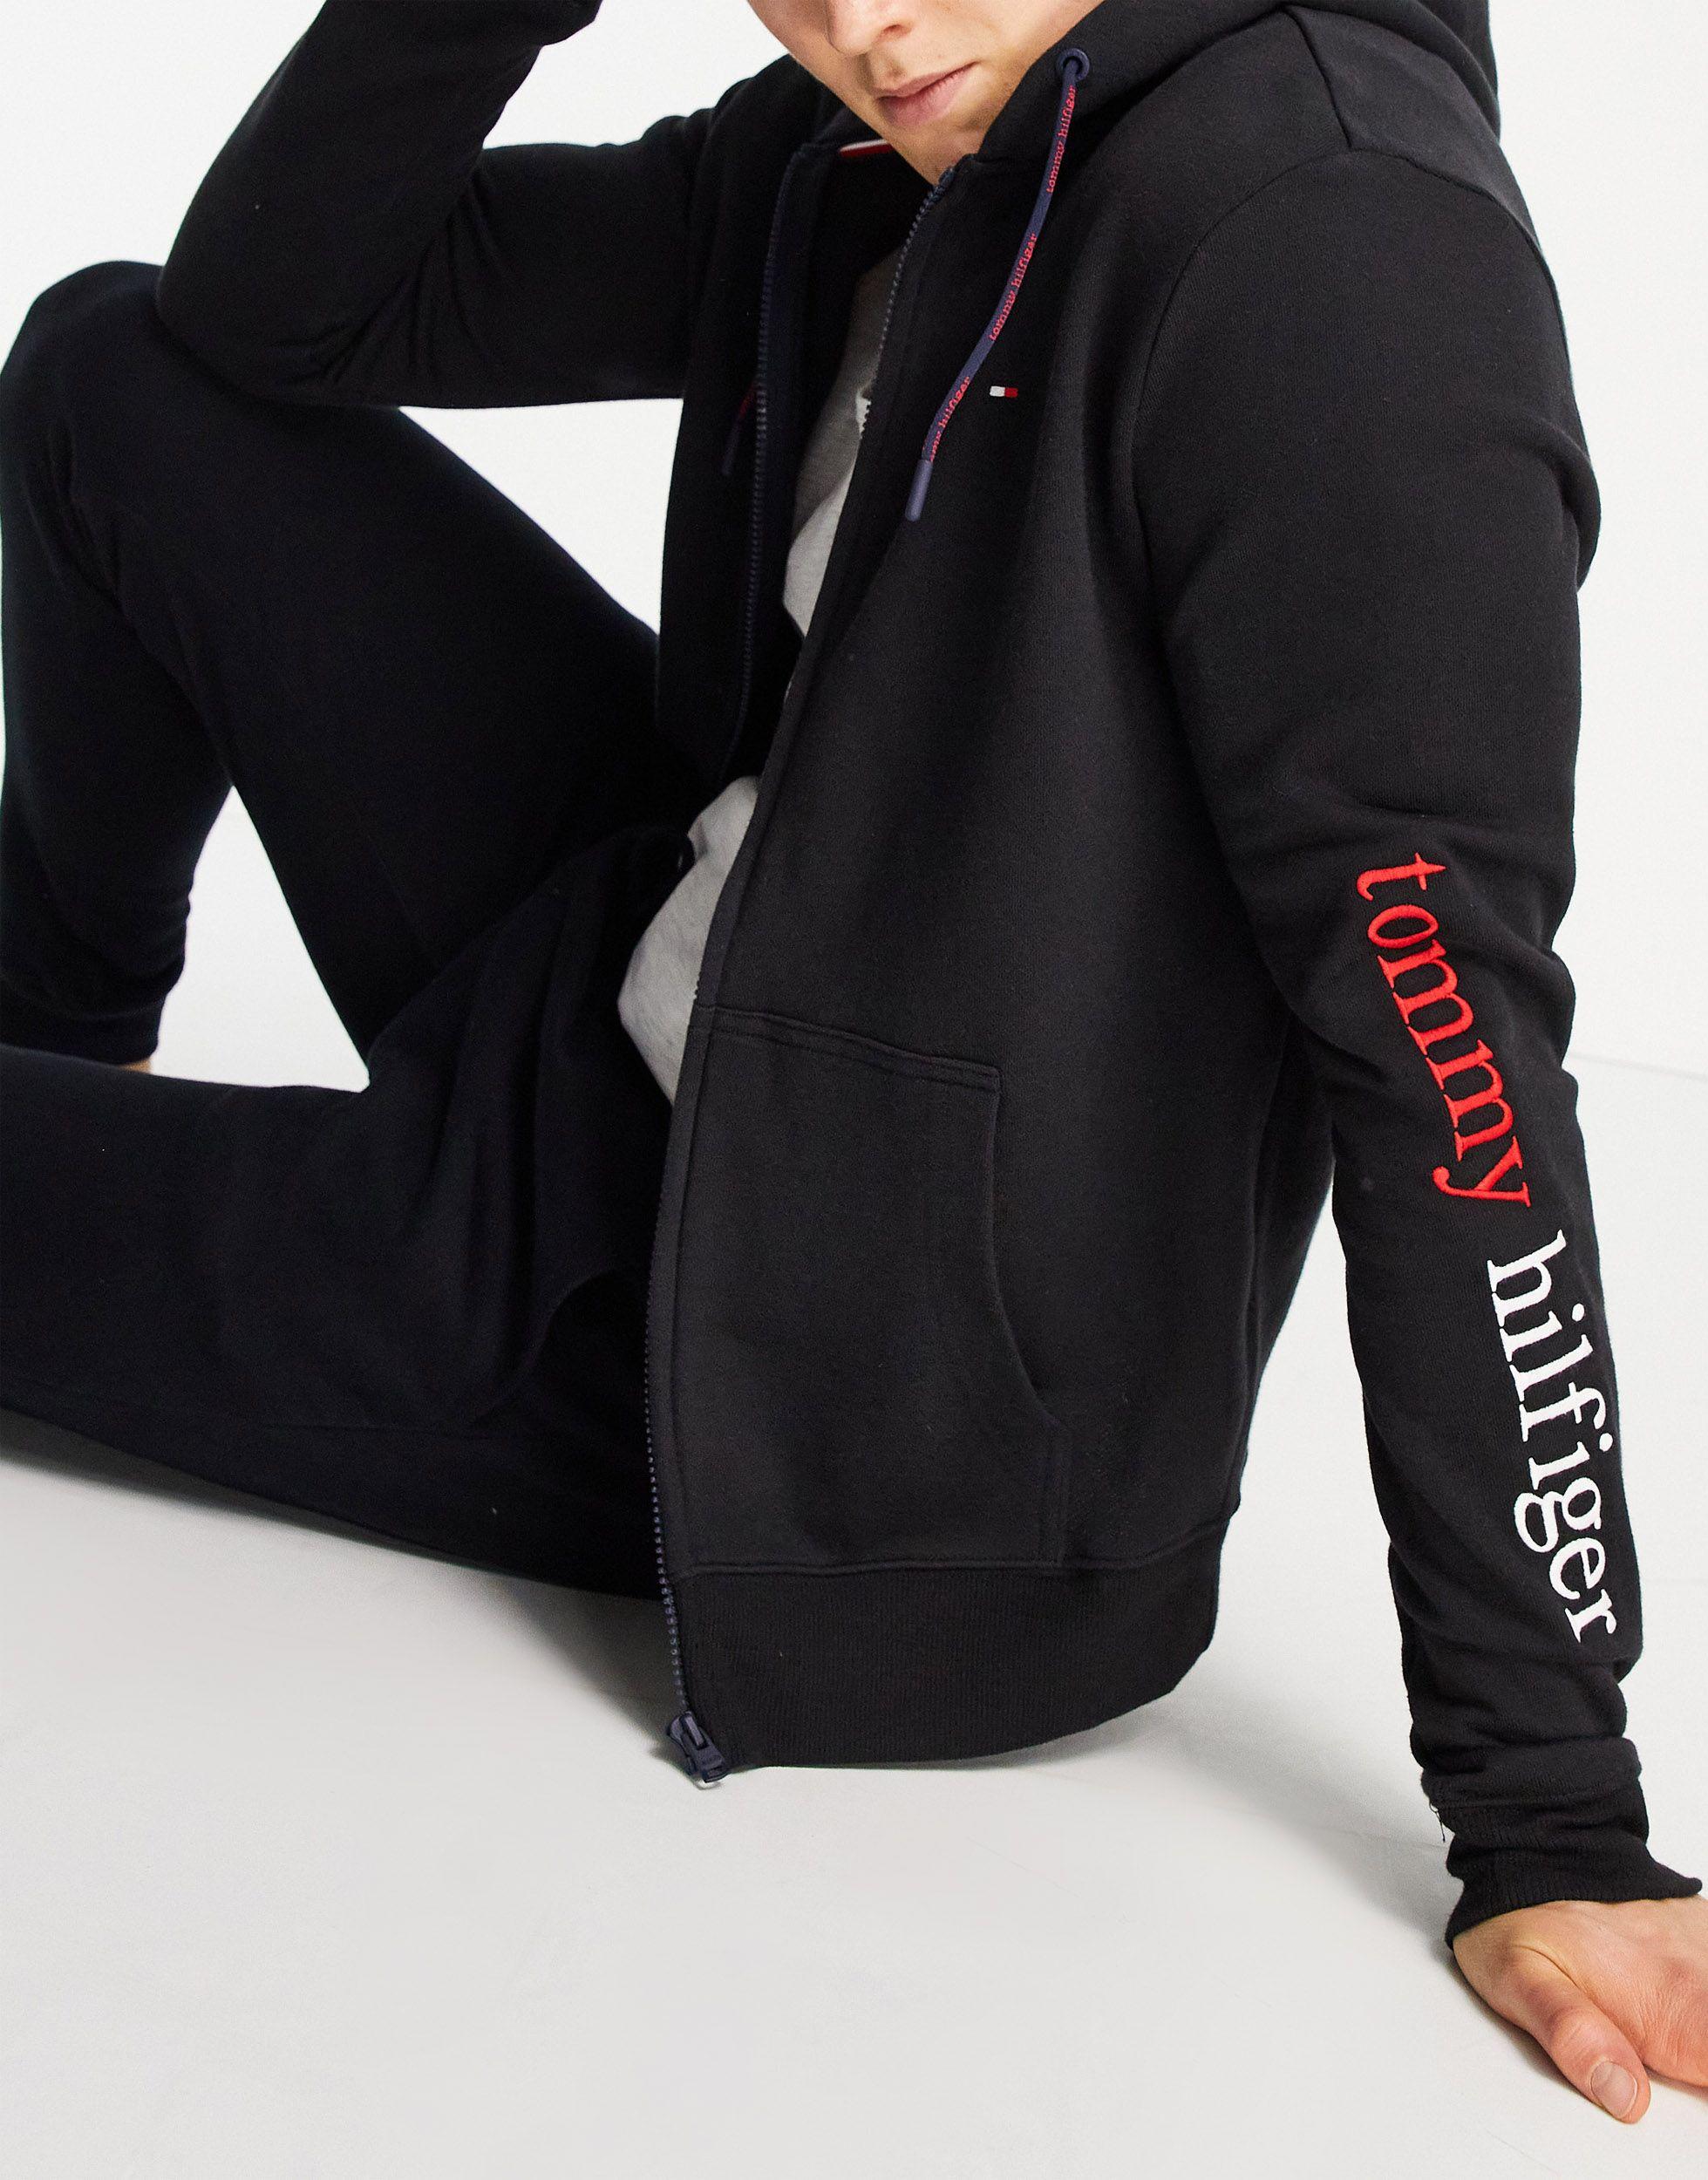 Tommy Hilfiger Asos Exclusive Lounge Hoodie With Chest Remix Logo in Black  for Men - Lyst